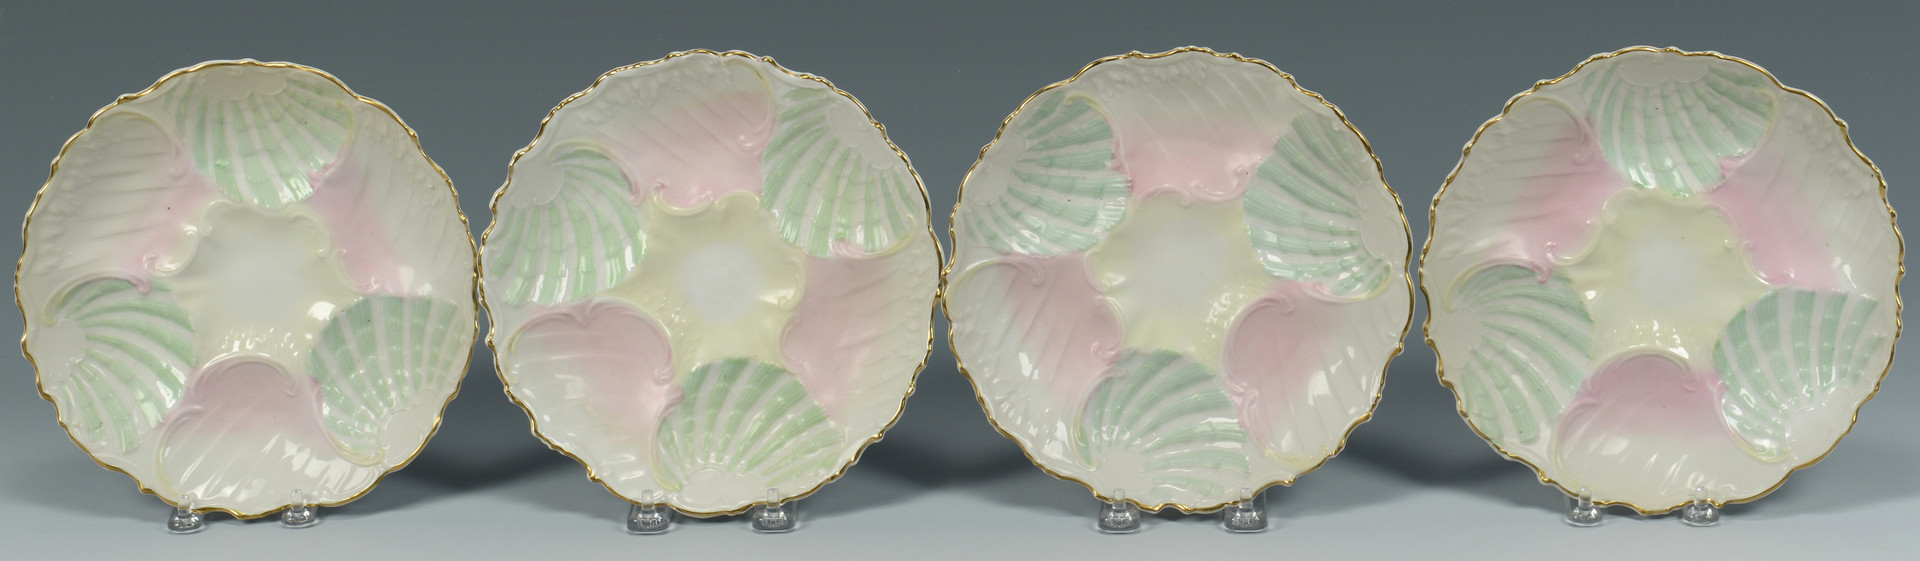 Lot 348: 12 Oyster Plates (11 plus 1)